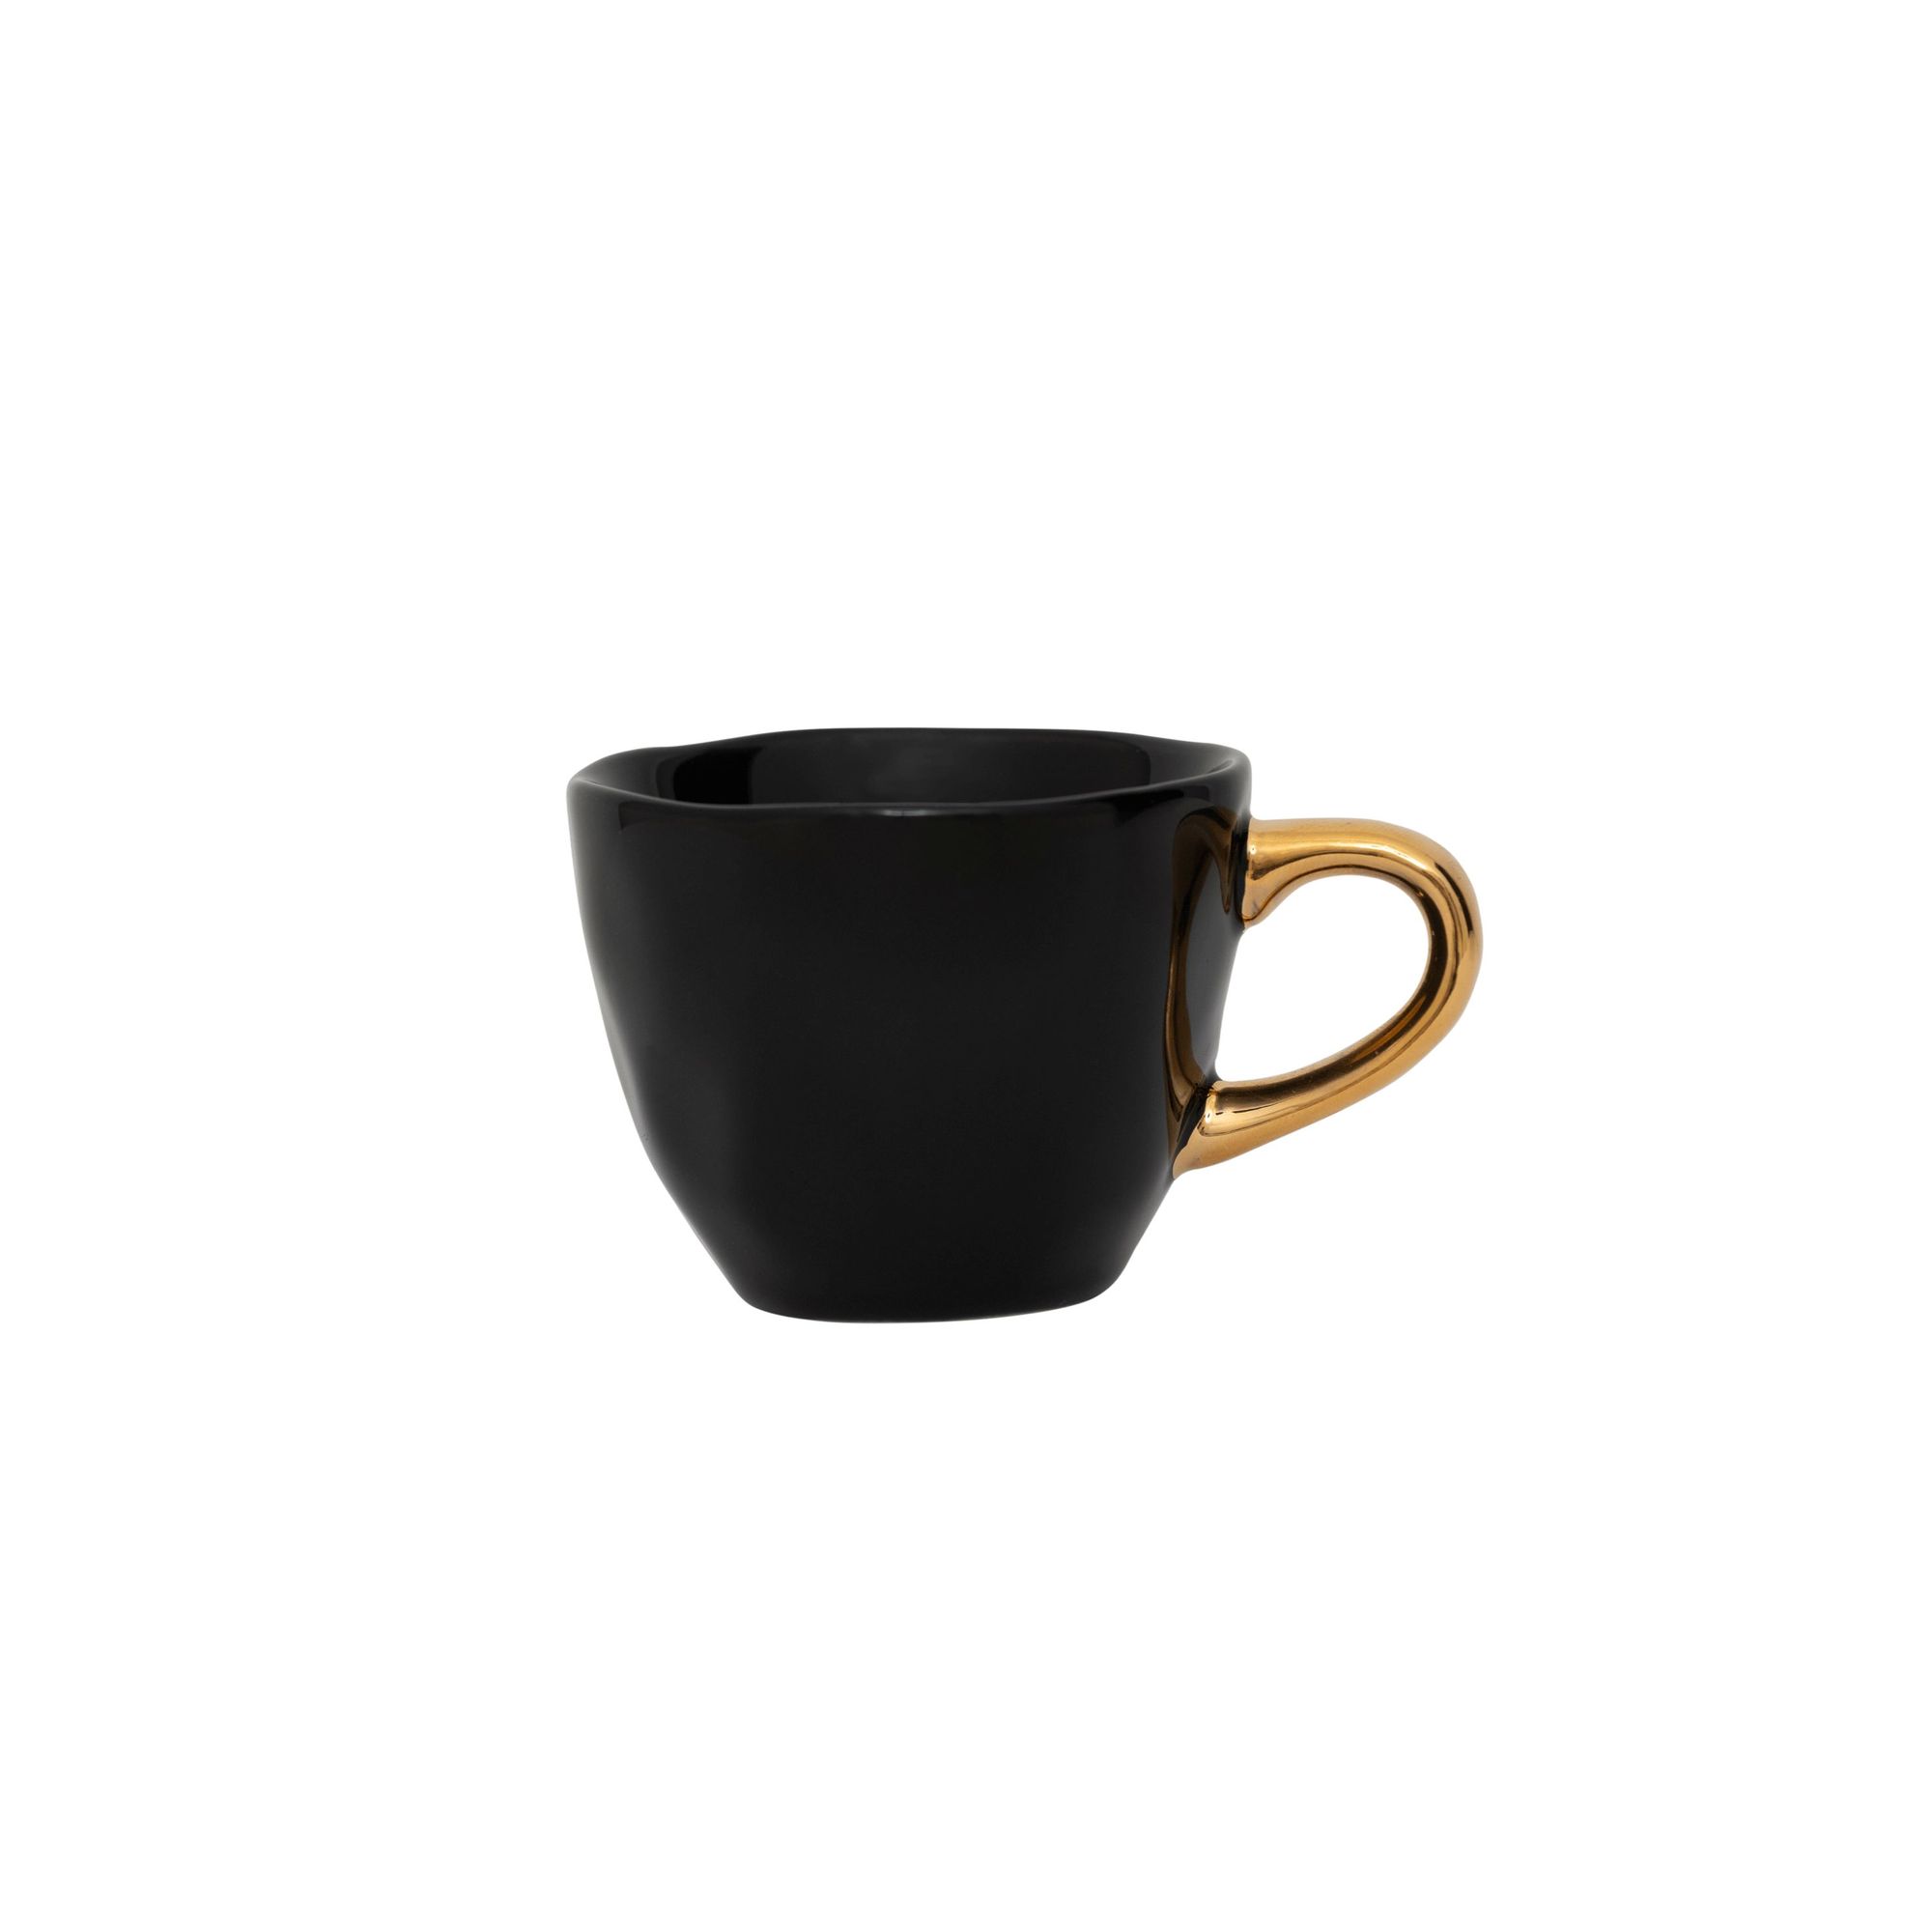 Unc Good Morning Cup Espresso Black Gift